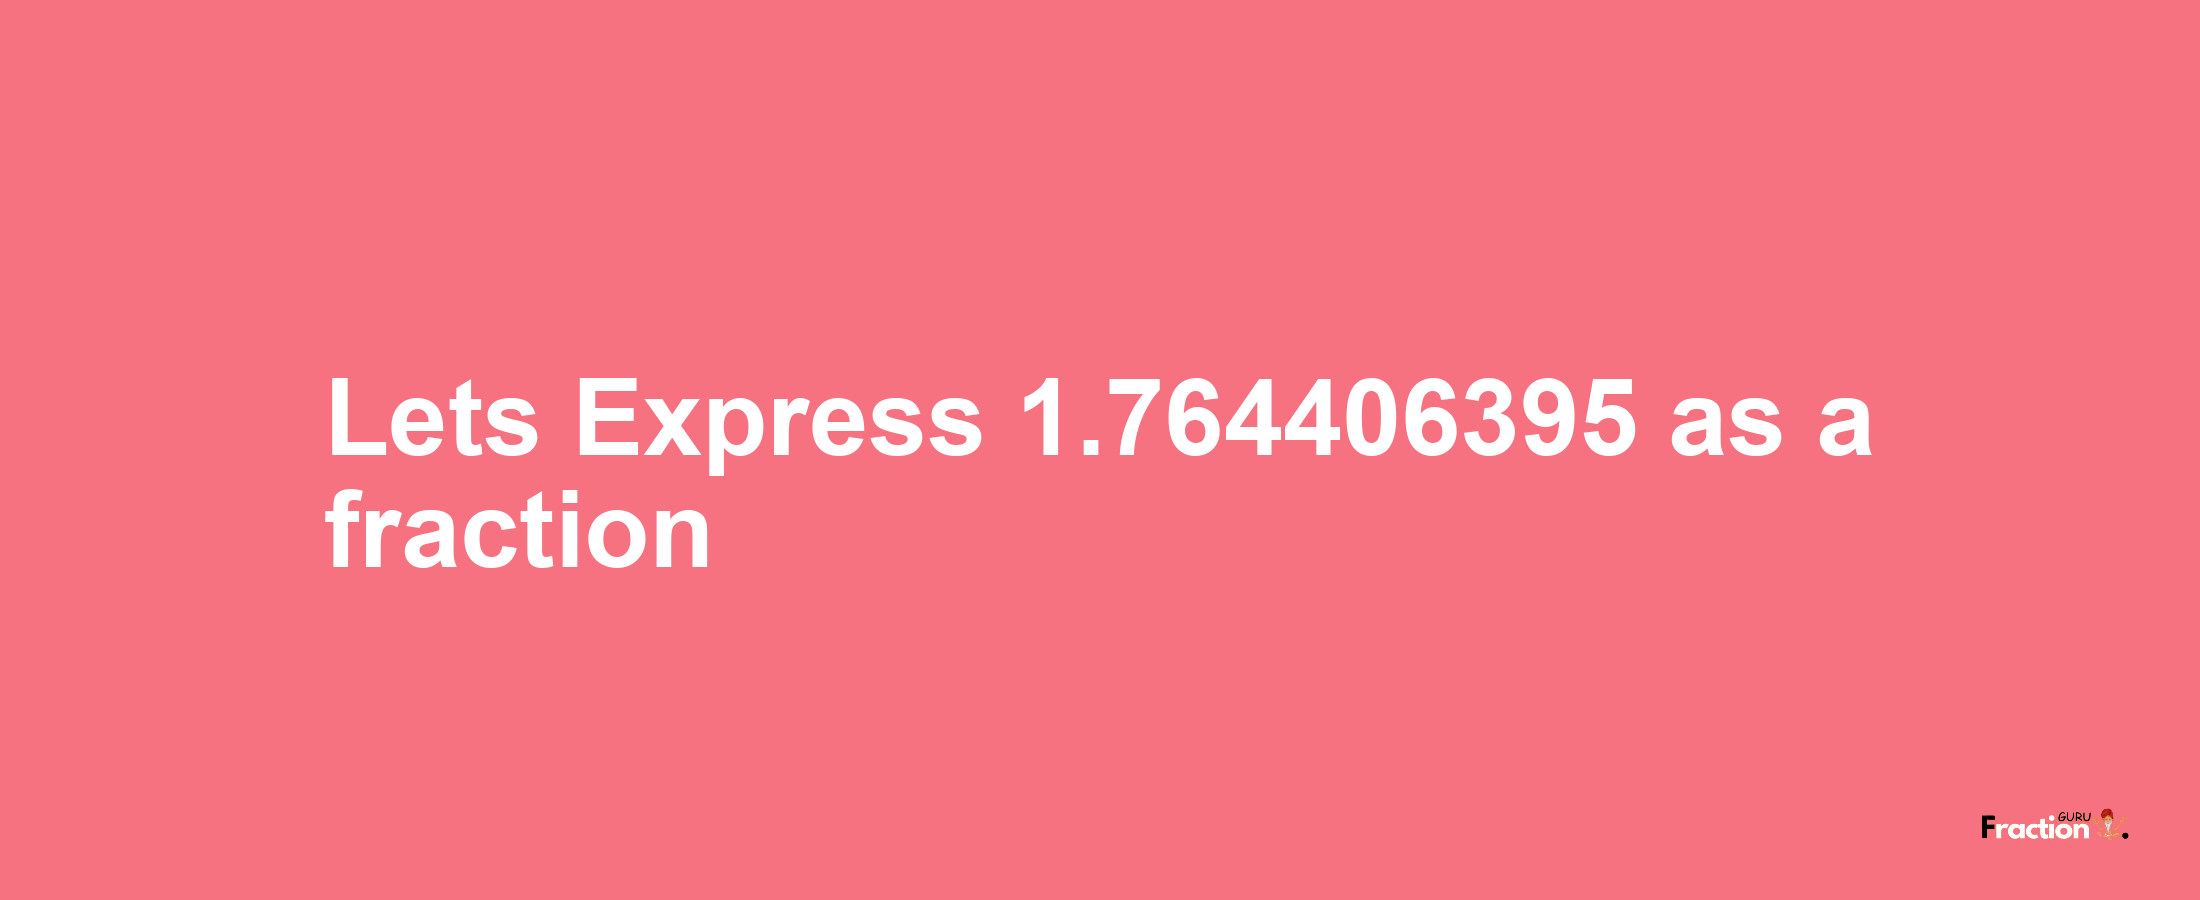 Lets Express 1.764406395 as afraction